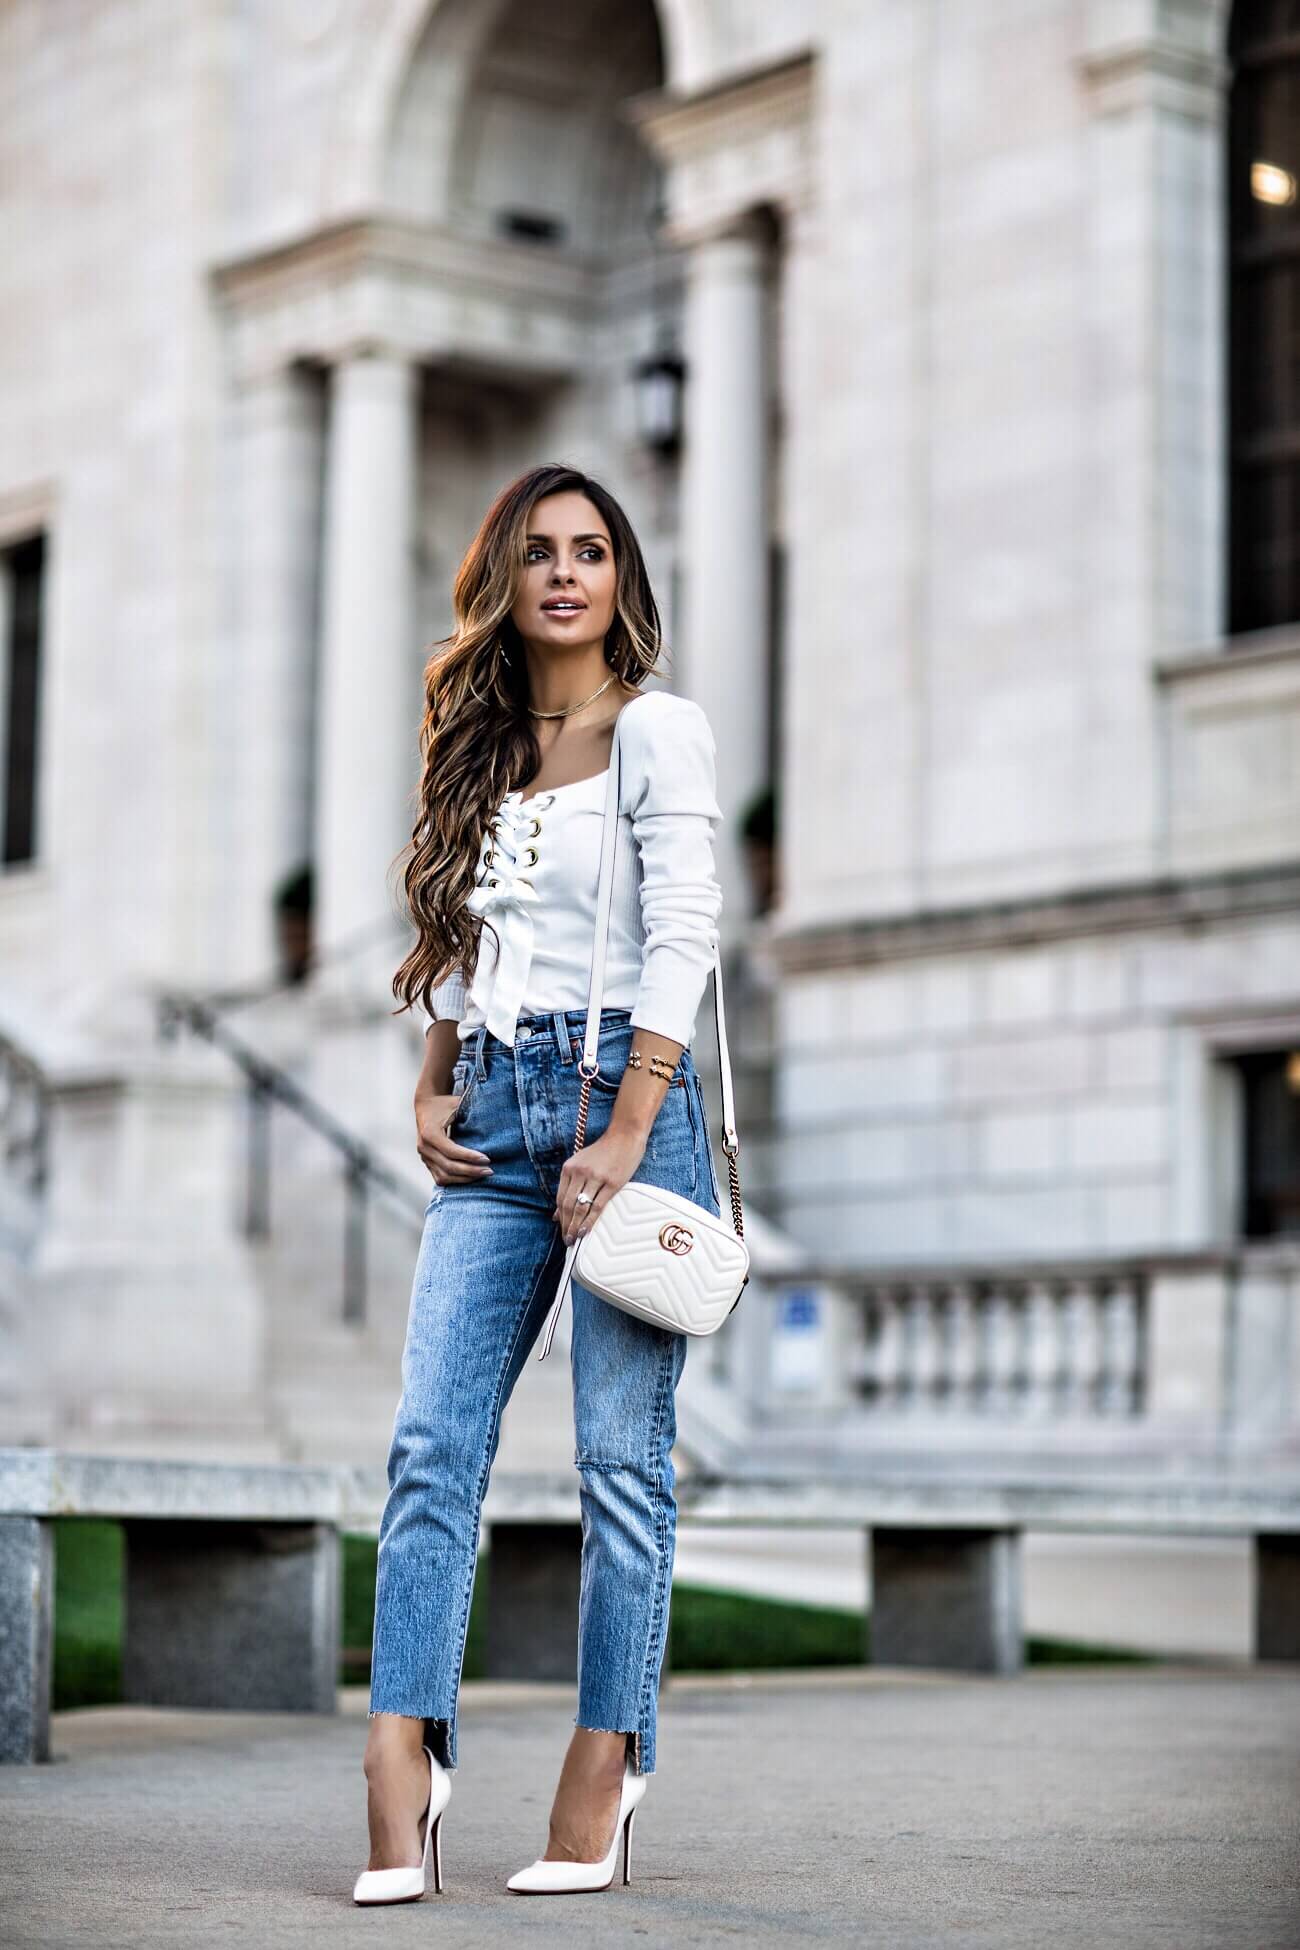 fashion blogger mia mia mine wearing a white lace-up top from free people and levi's jeans